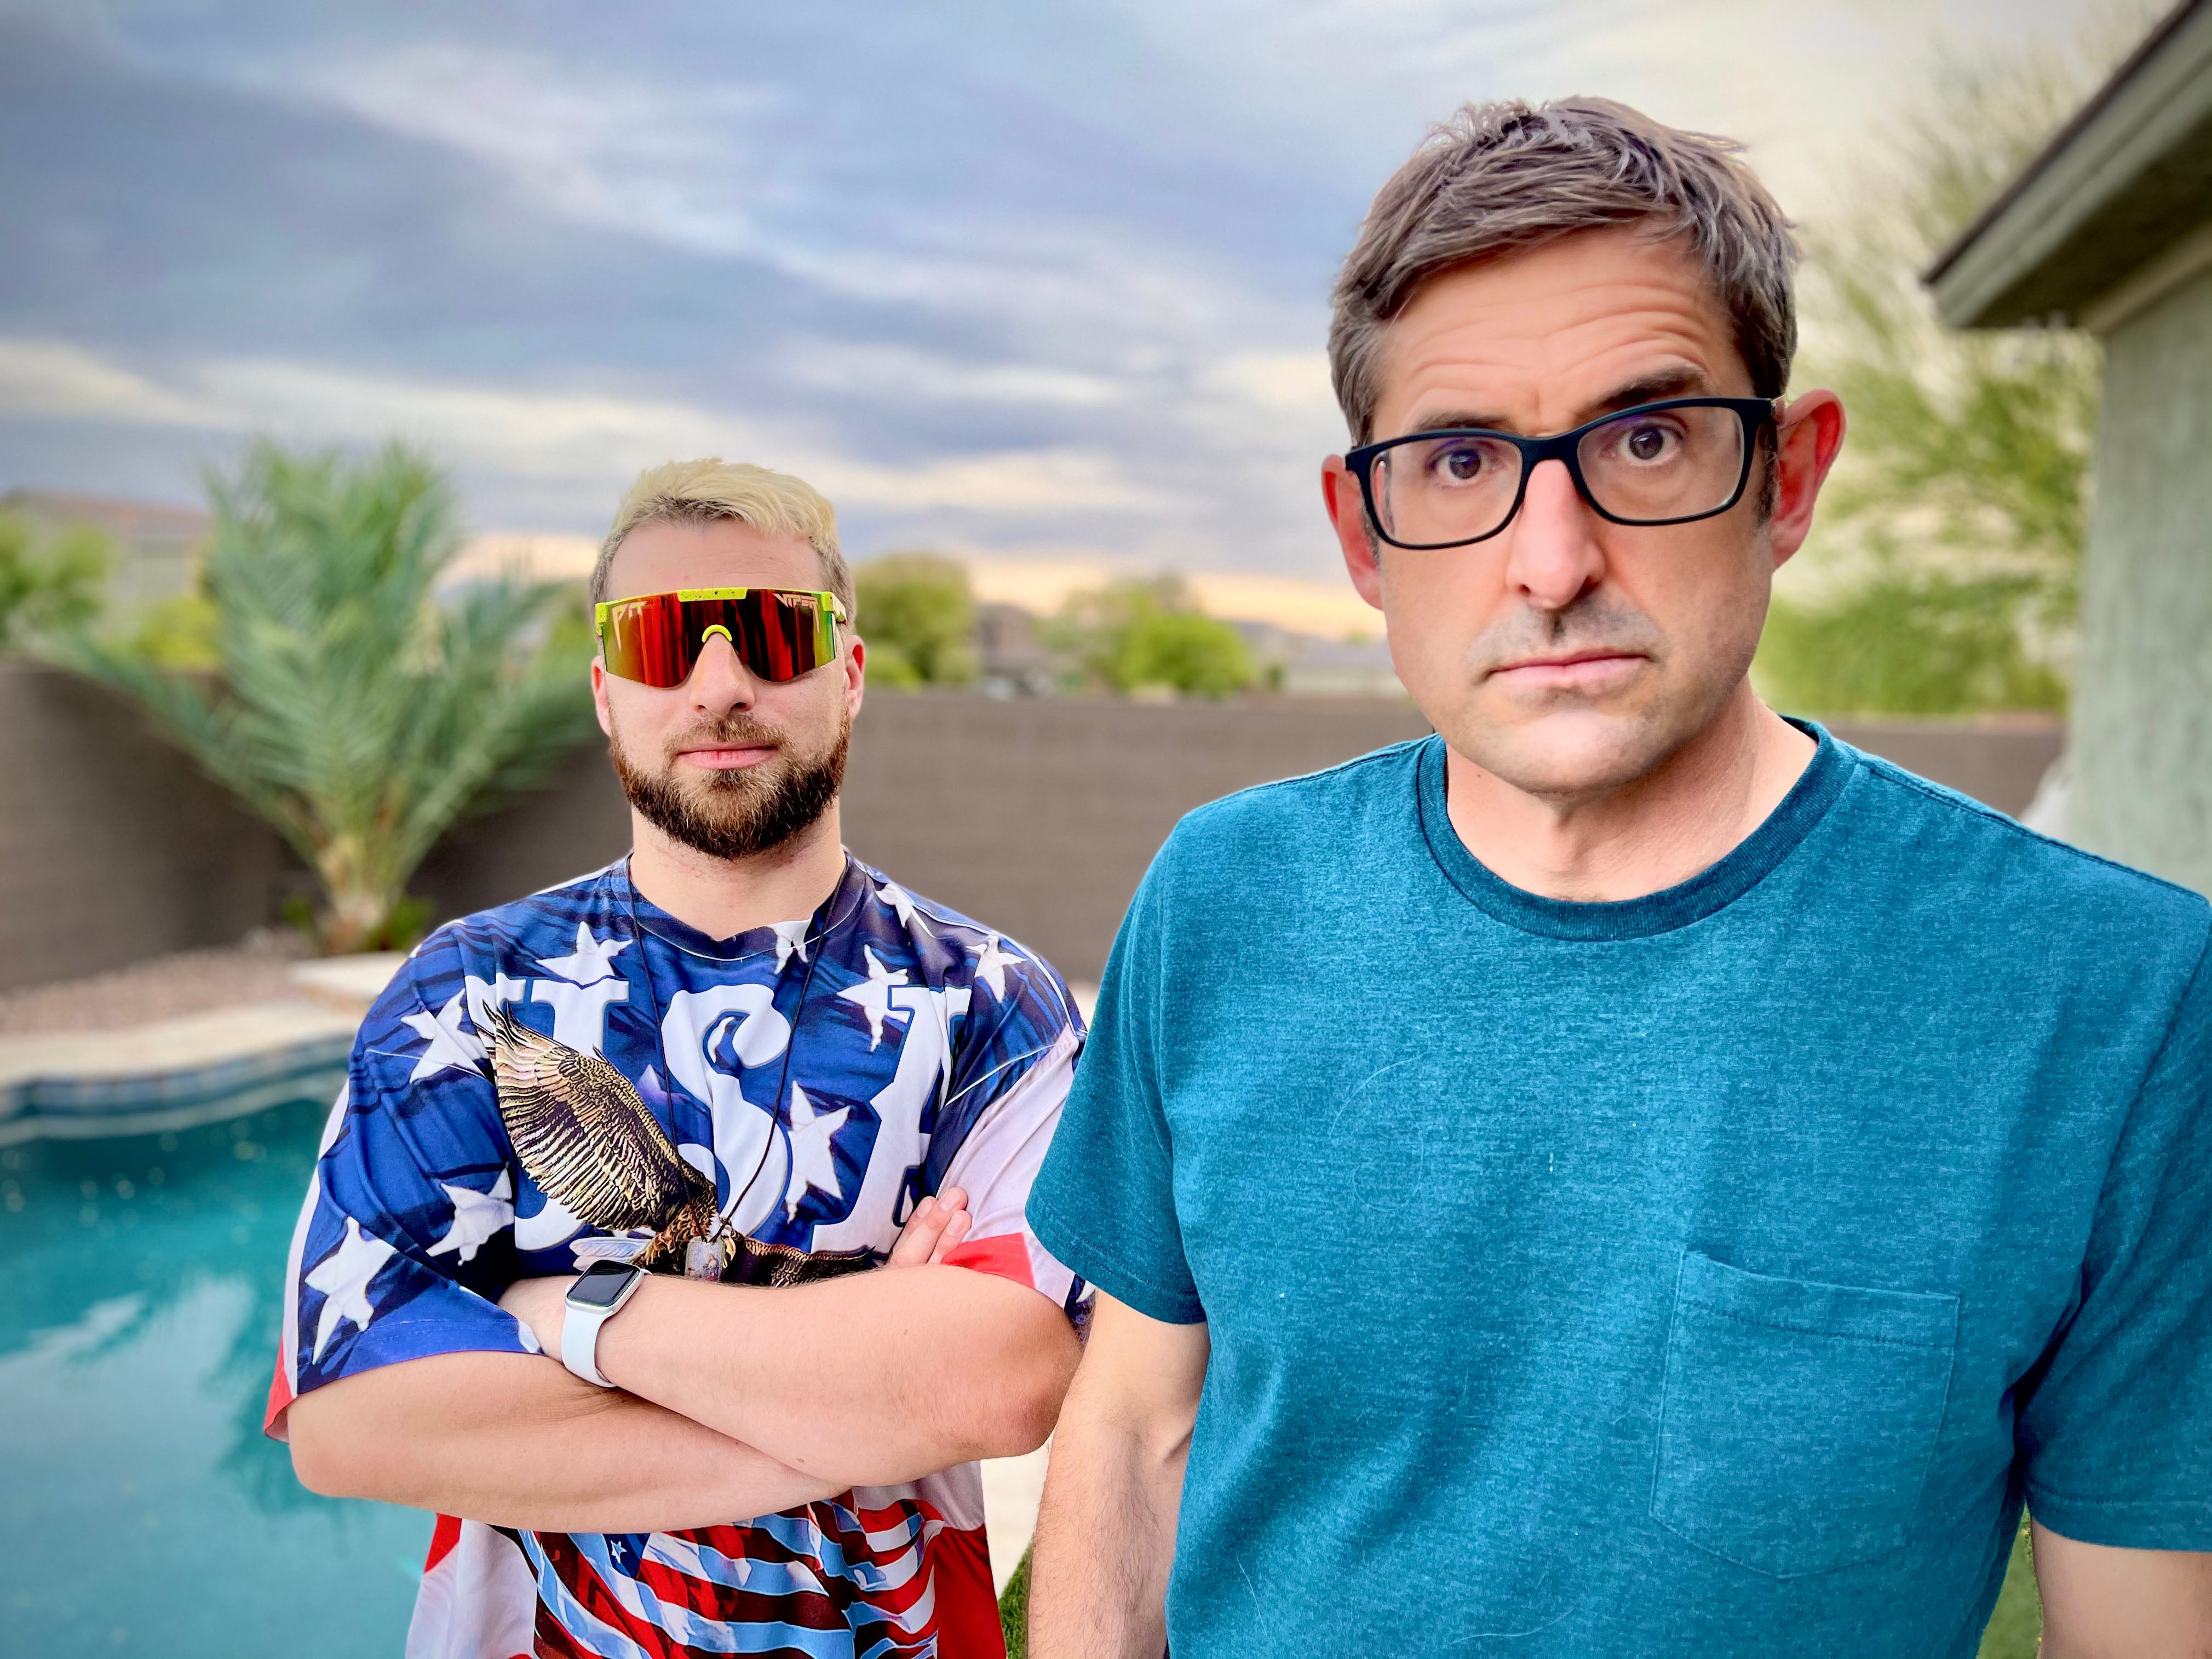 Capitol rioter Baked Alaska and Louis Theroux